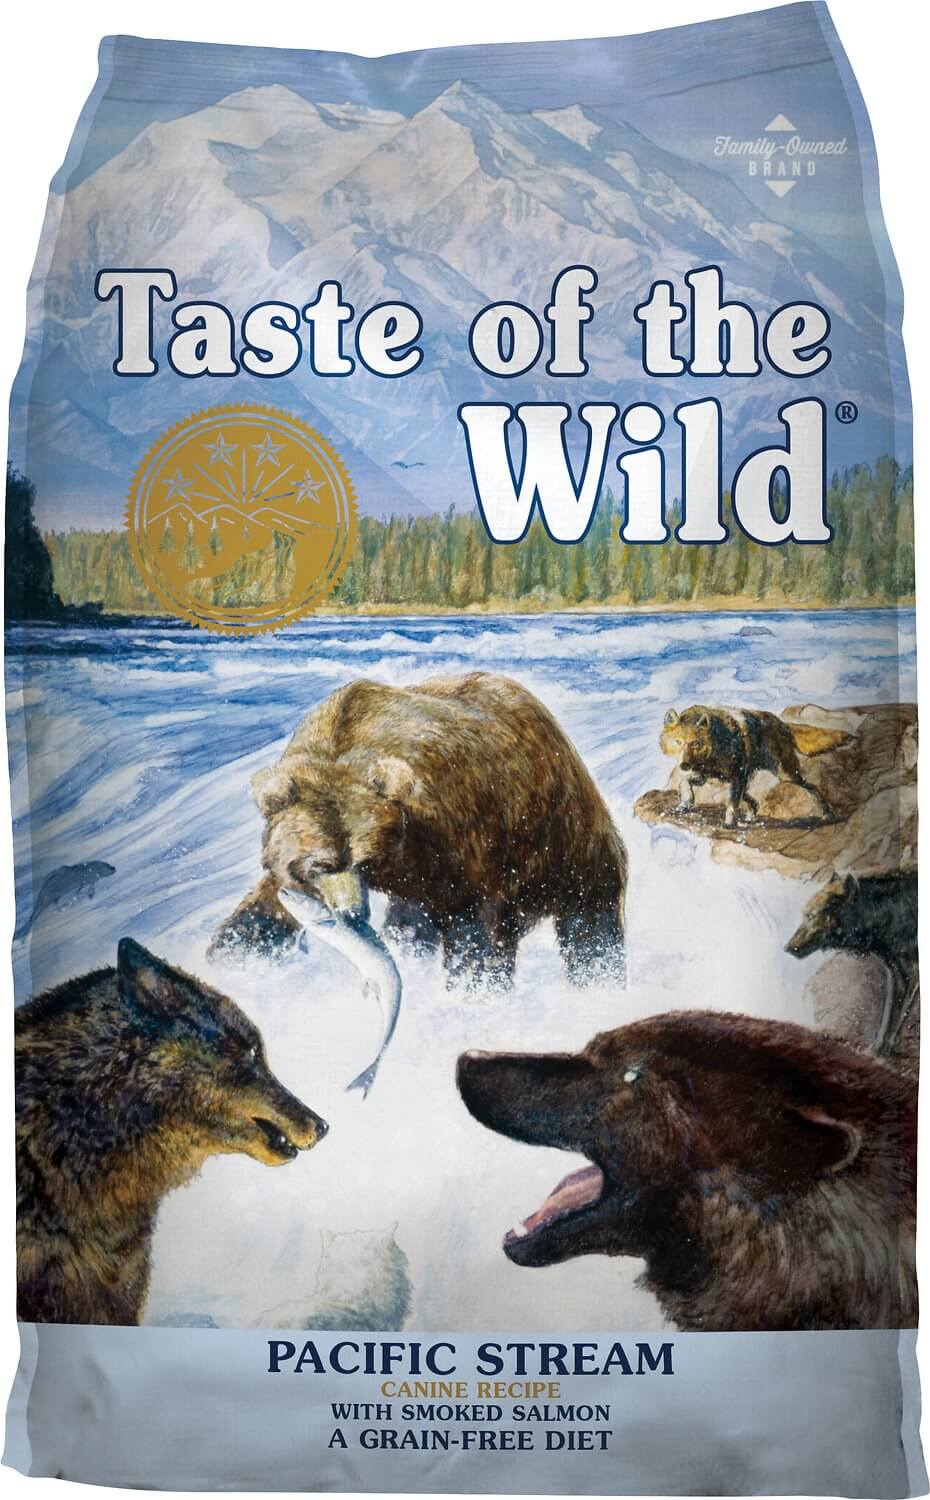 Taste of the Wild - Best Dog Food for Great Danes